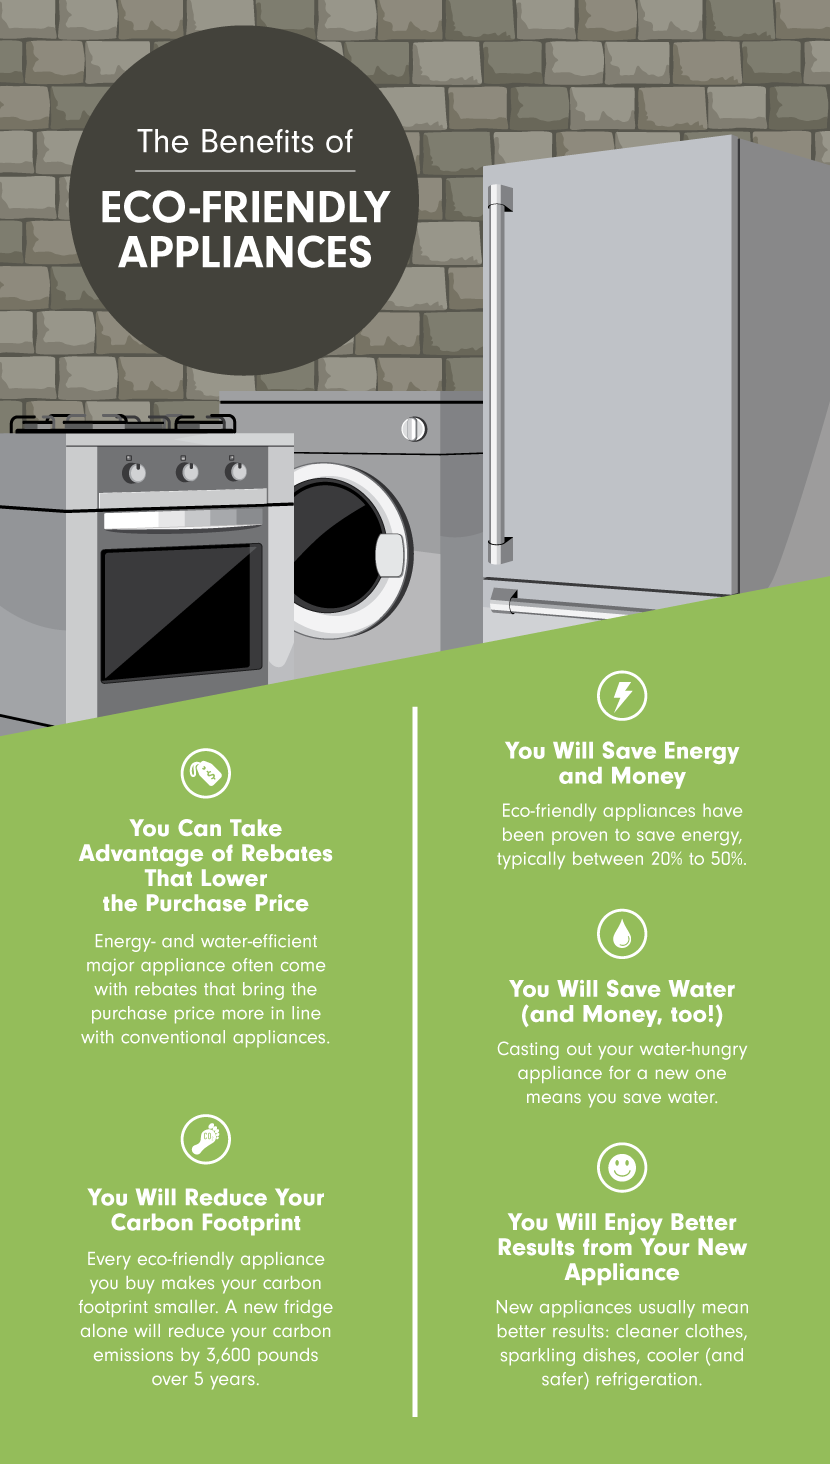 The Benefits of Eco-friendly Appliances - The Environmental Impact of Using Energy-Efficient Major Appliances 